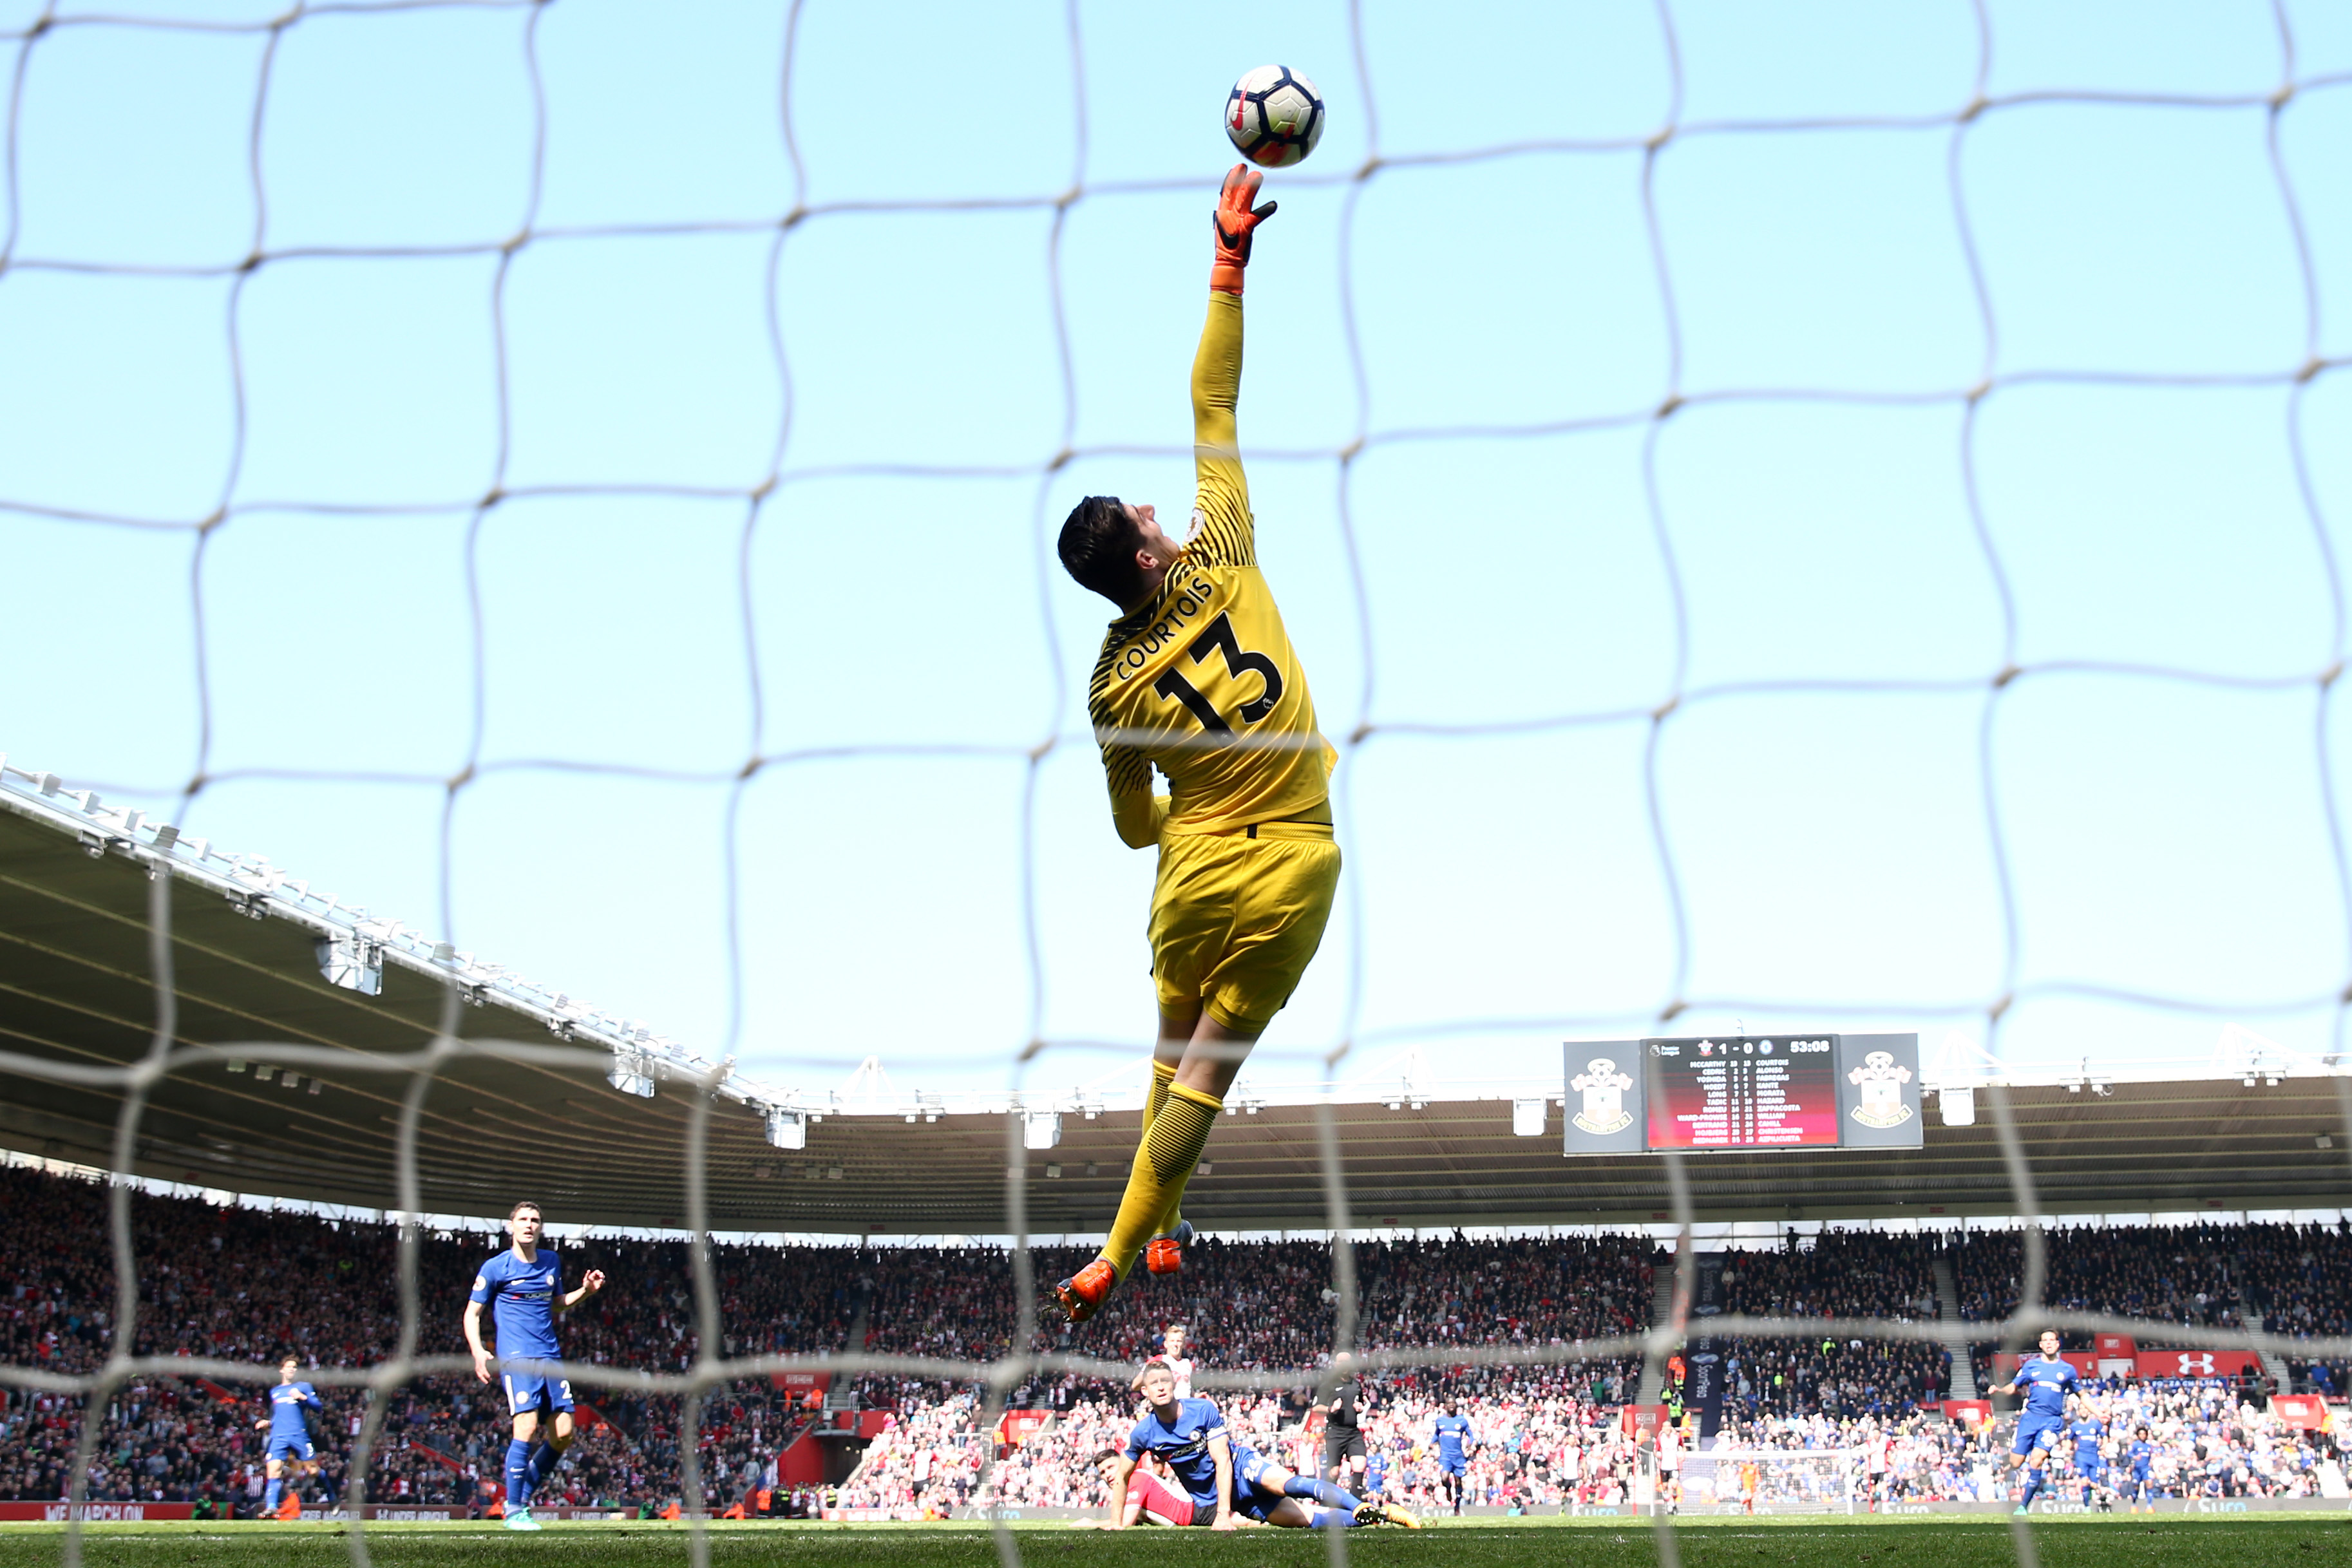 SOUTHAMPTON, ENGLAND - APRIL 14:  Thibaut Courtois of Chelsea makes a save during the Premier League match between Southampton and Chelsea at St Mary's Stadium on April 14, 2018 in Southampton, England.  (Photo by Warren Little/Getty Images)